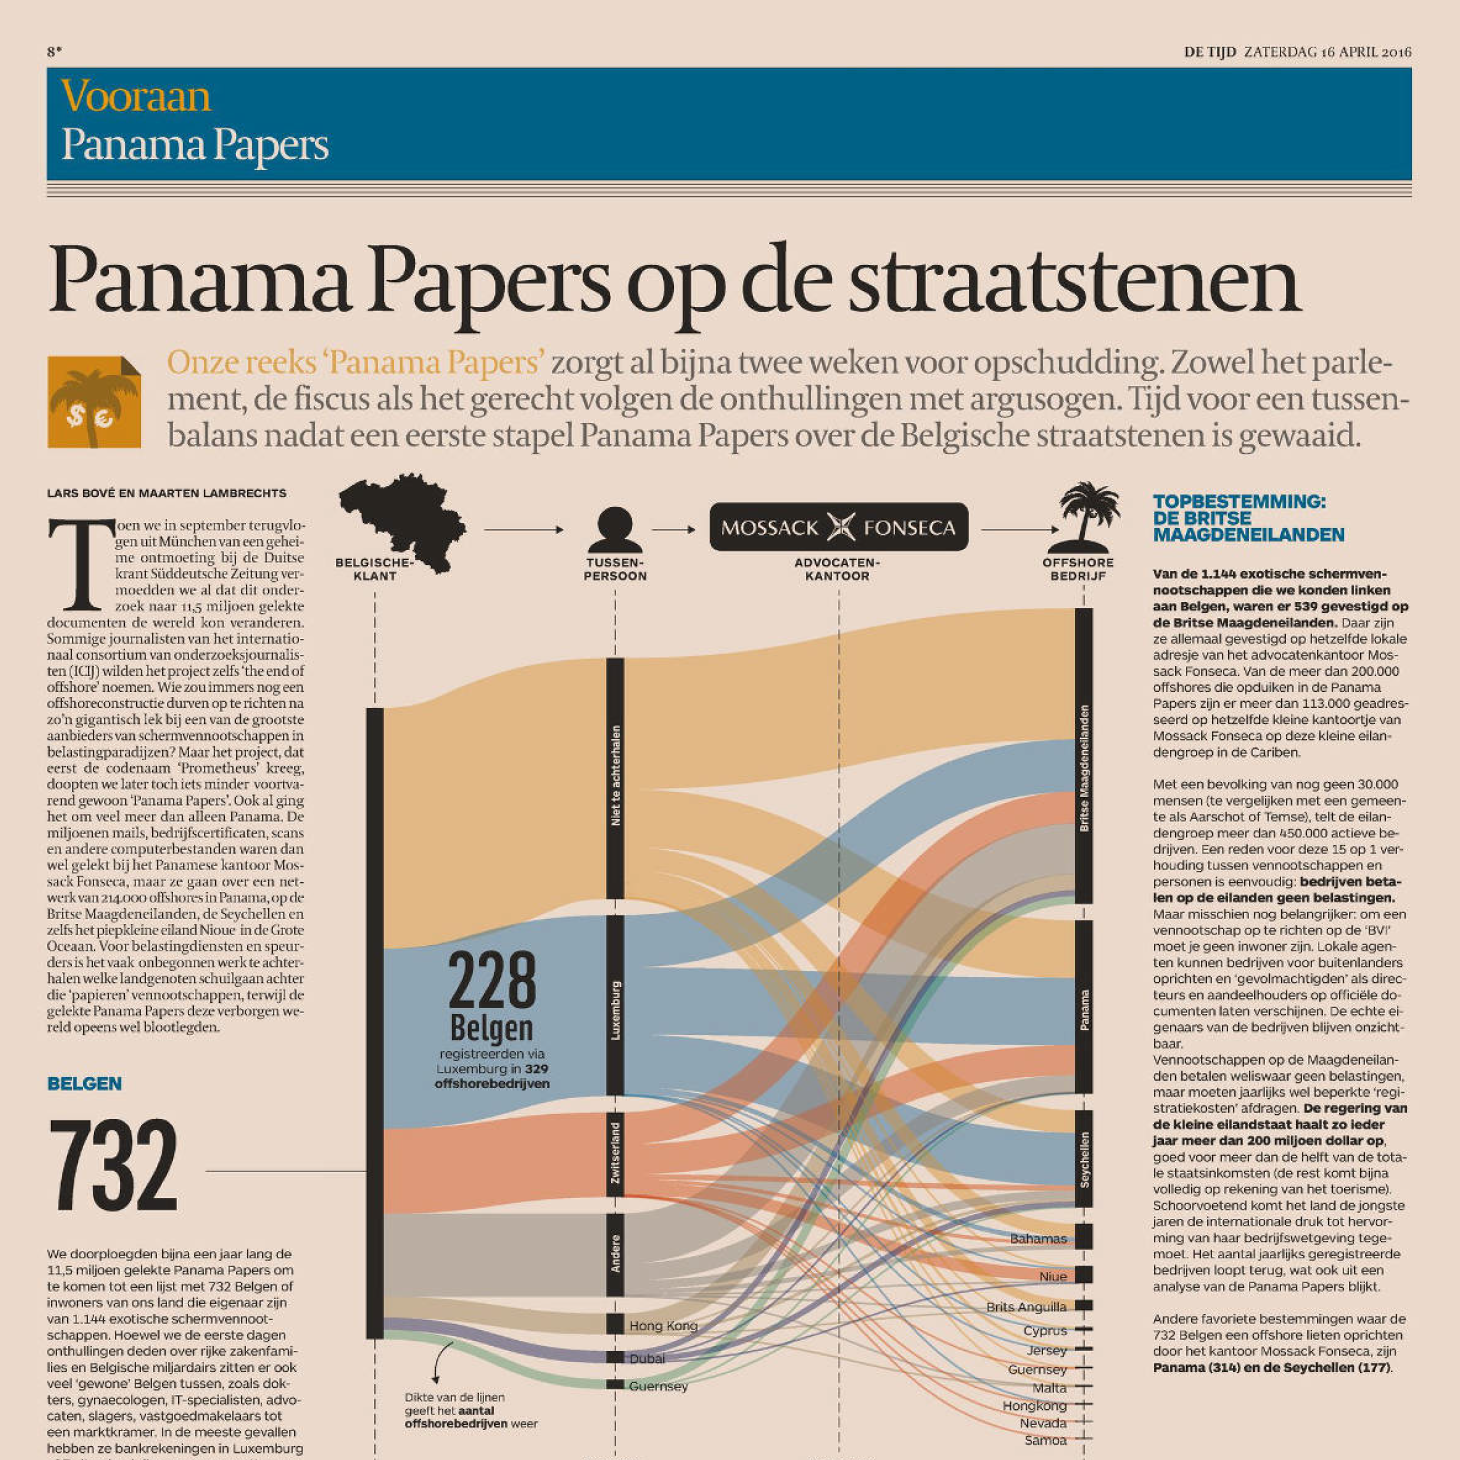 The Belgians in the Panama Papers